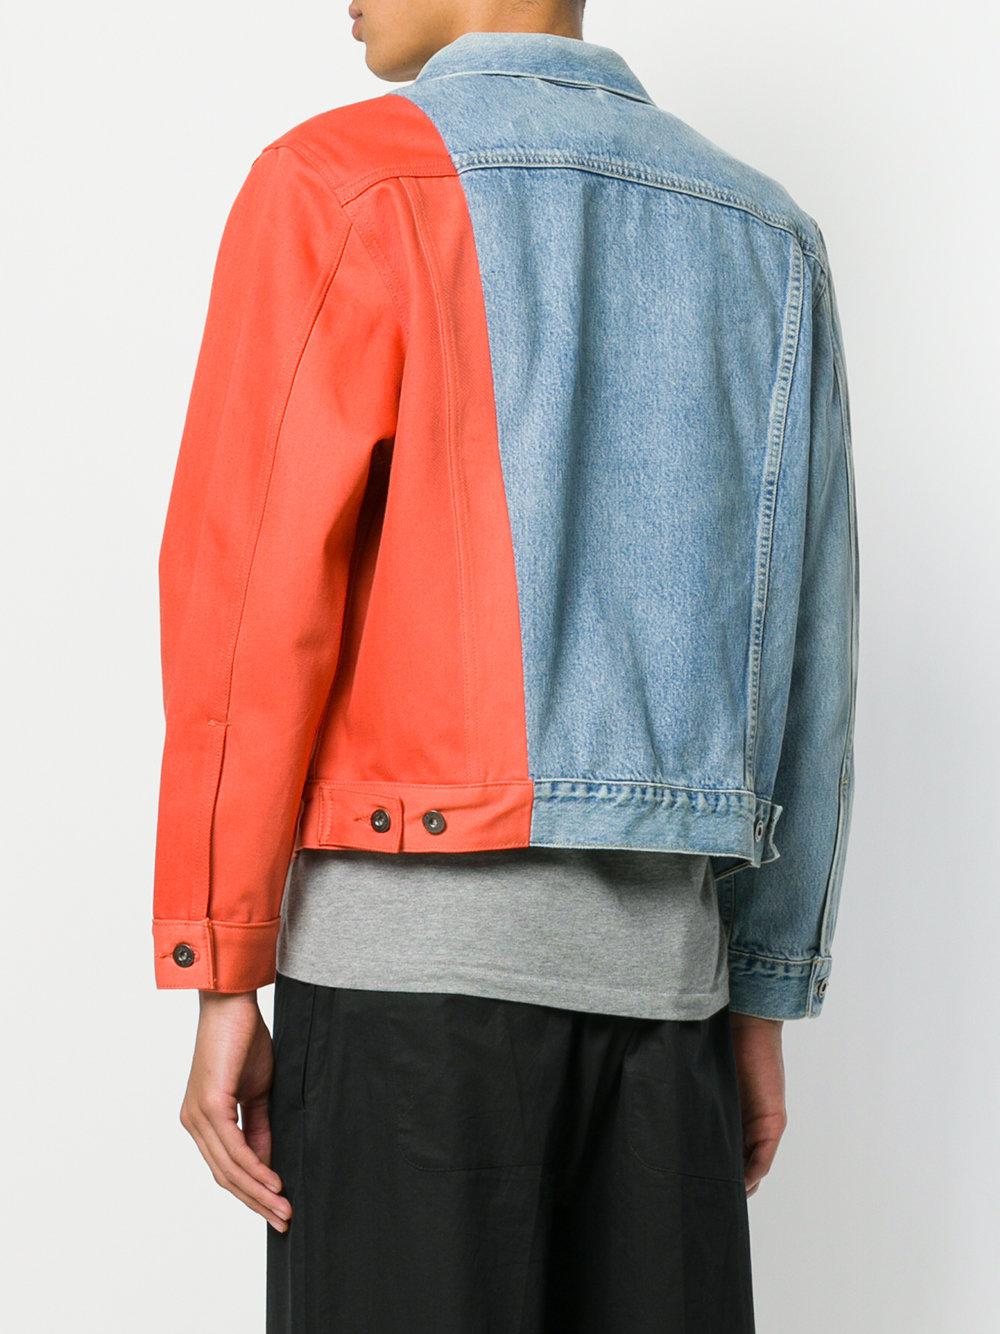 Off-White c/o Virgil Abloh X Levi's Made & Crafted Denim Jacket in Blue -  Lyst